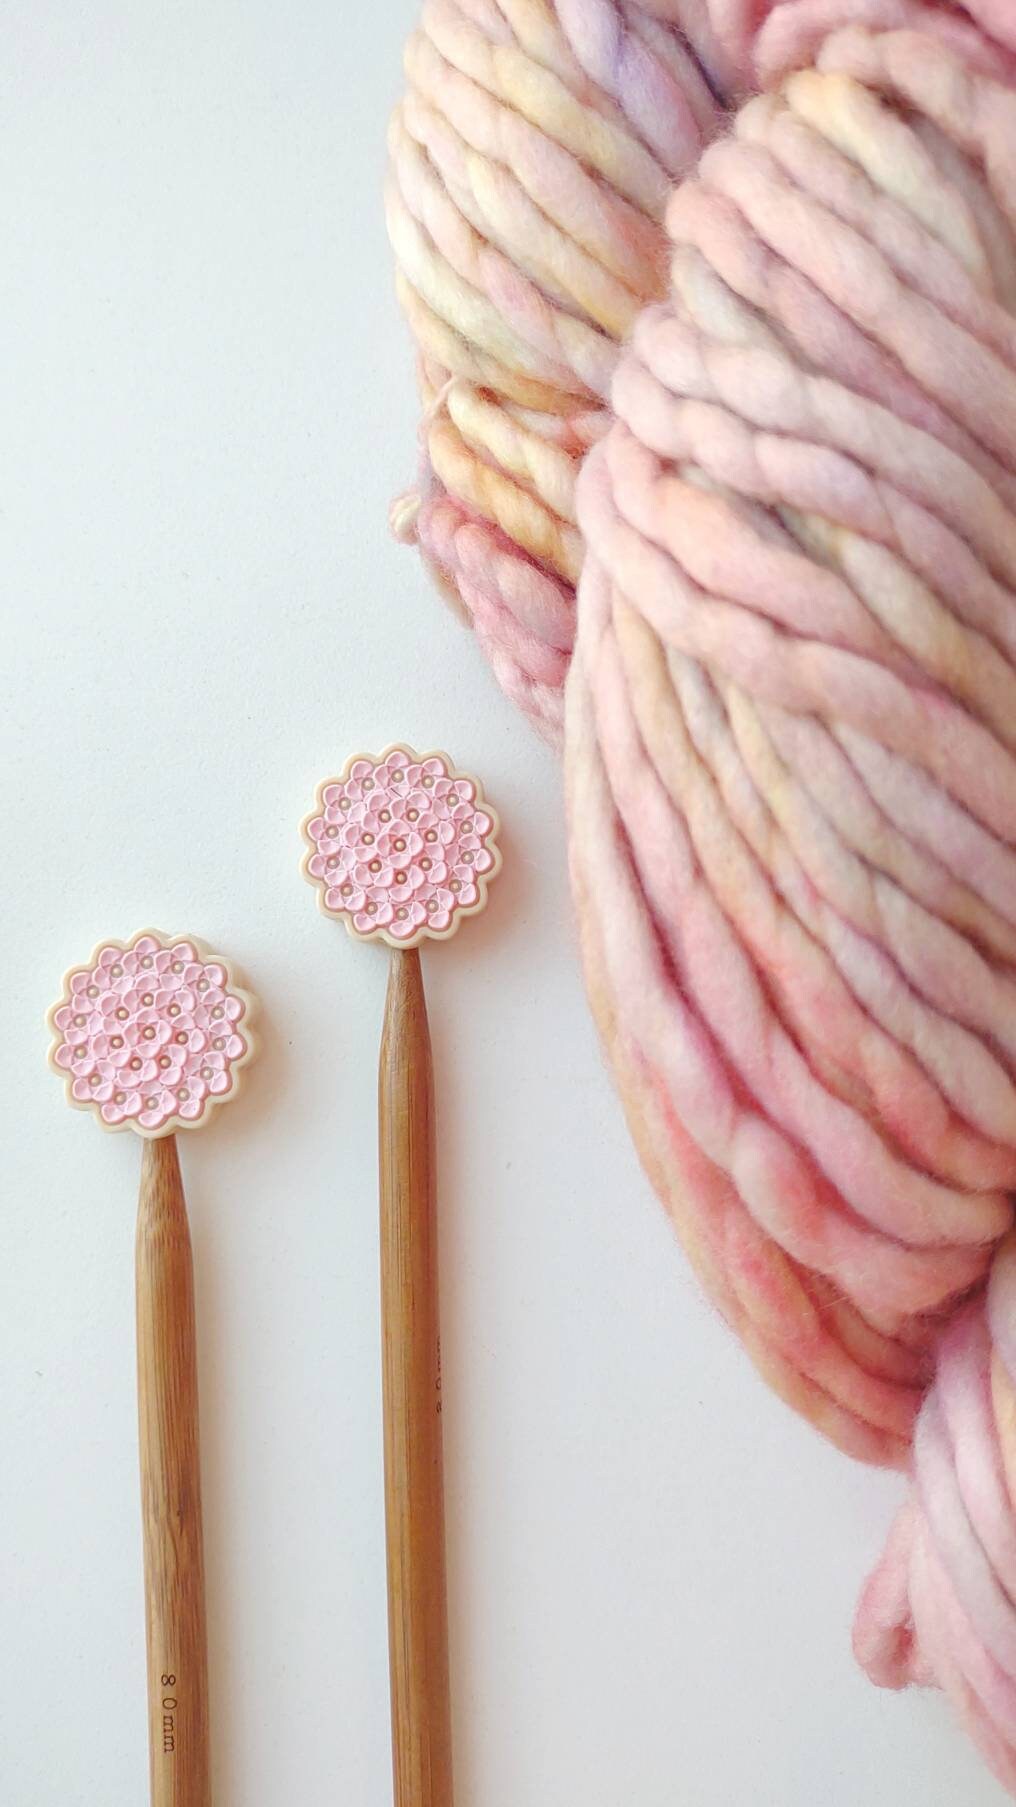 Pink Hydrangea Knitting Needle Stitch Stoppers. Needle Protectors. Knitting Needle Stoppers. Flower Knitting Notions Accessories Supplies.